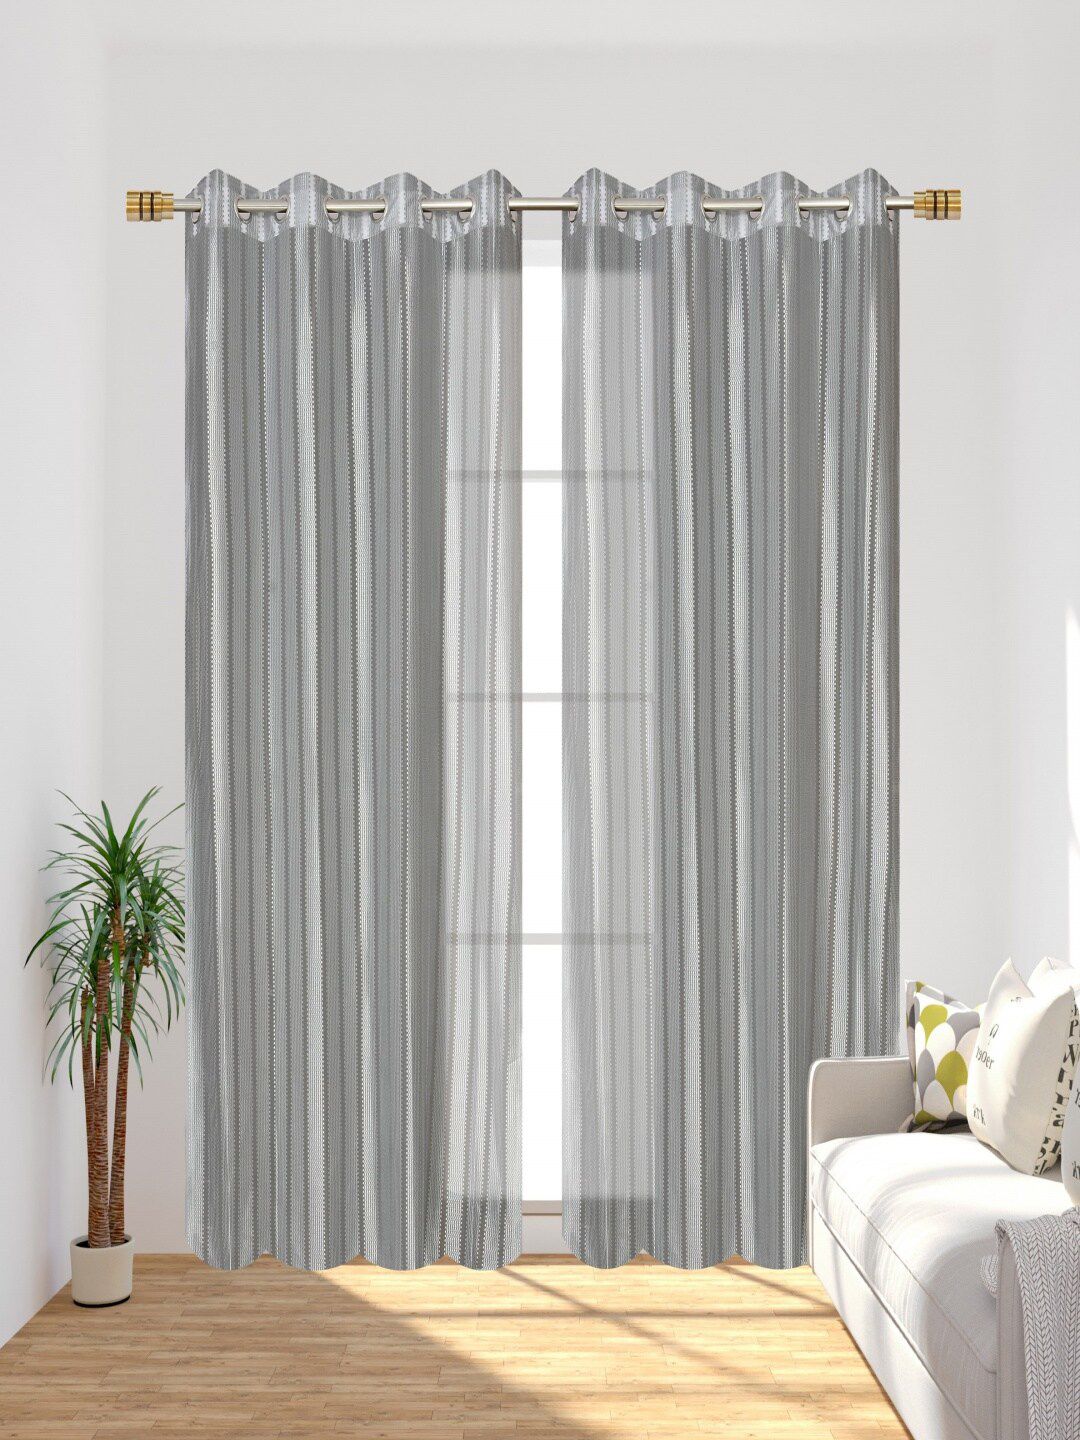 Homefab India Set of 2 Striped Sheer Long Door Curtains Price in India